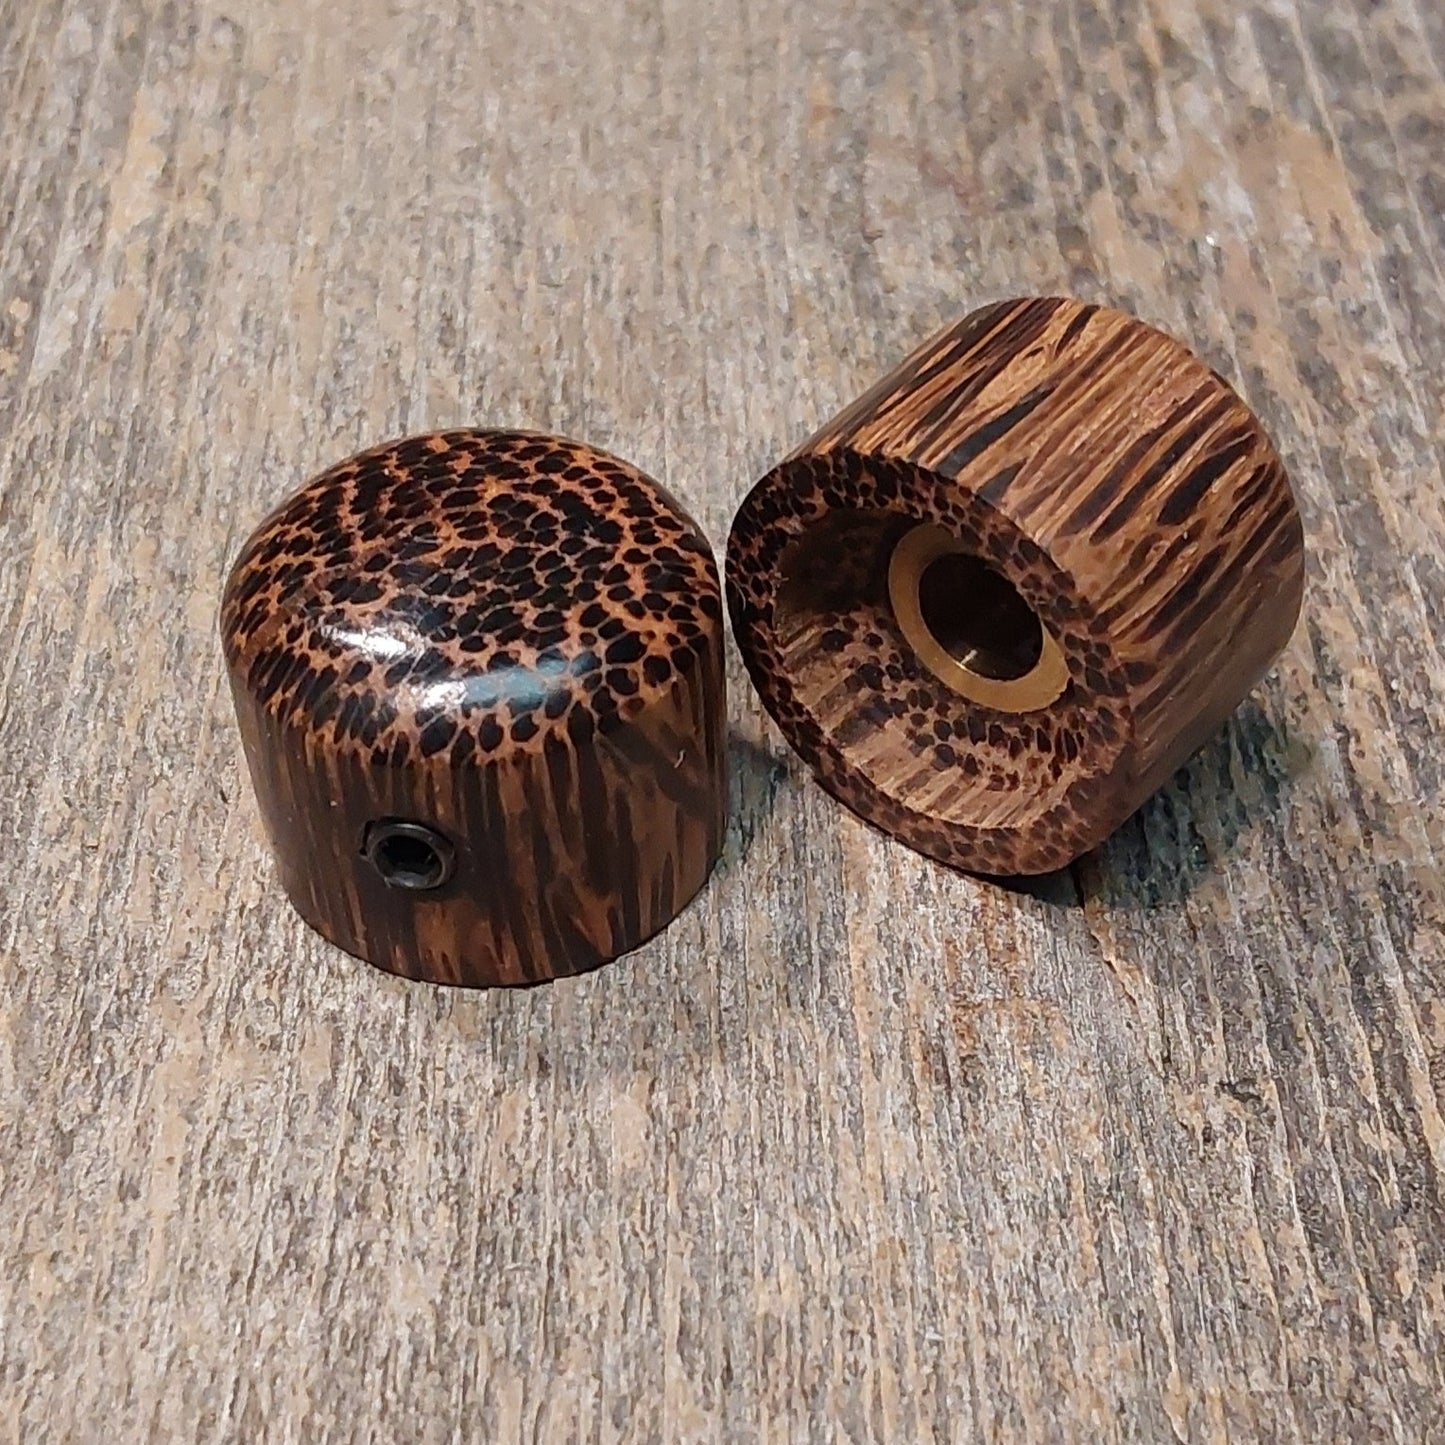 Allparts PK-3196-000 Tigerwood Knobs pack of two